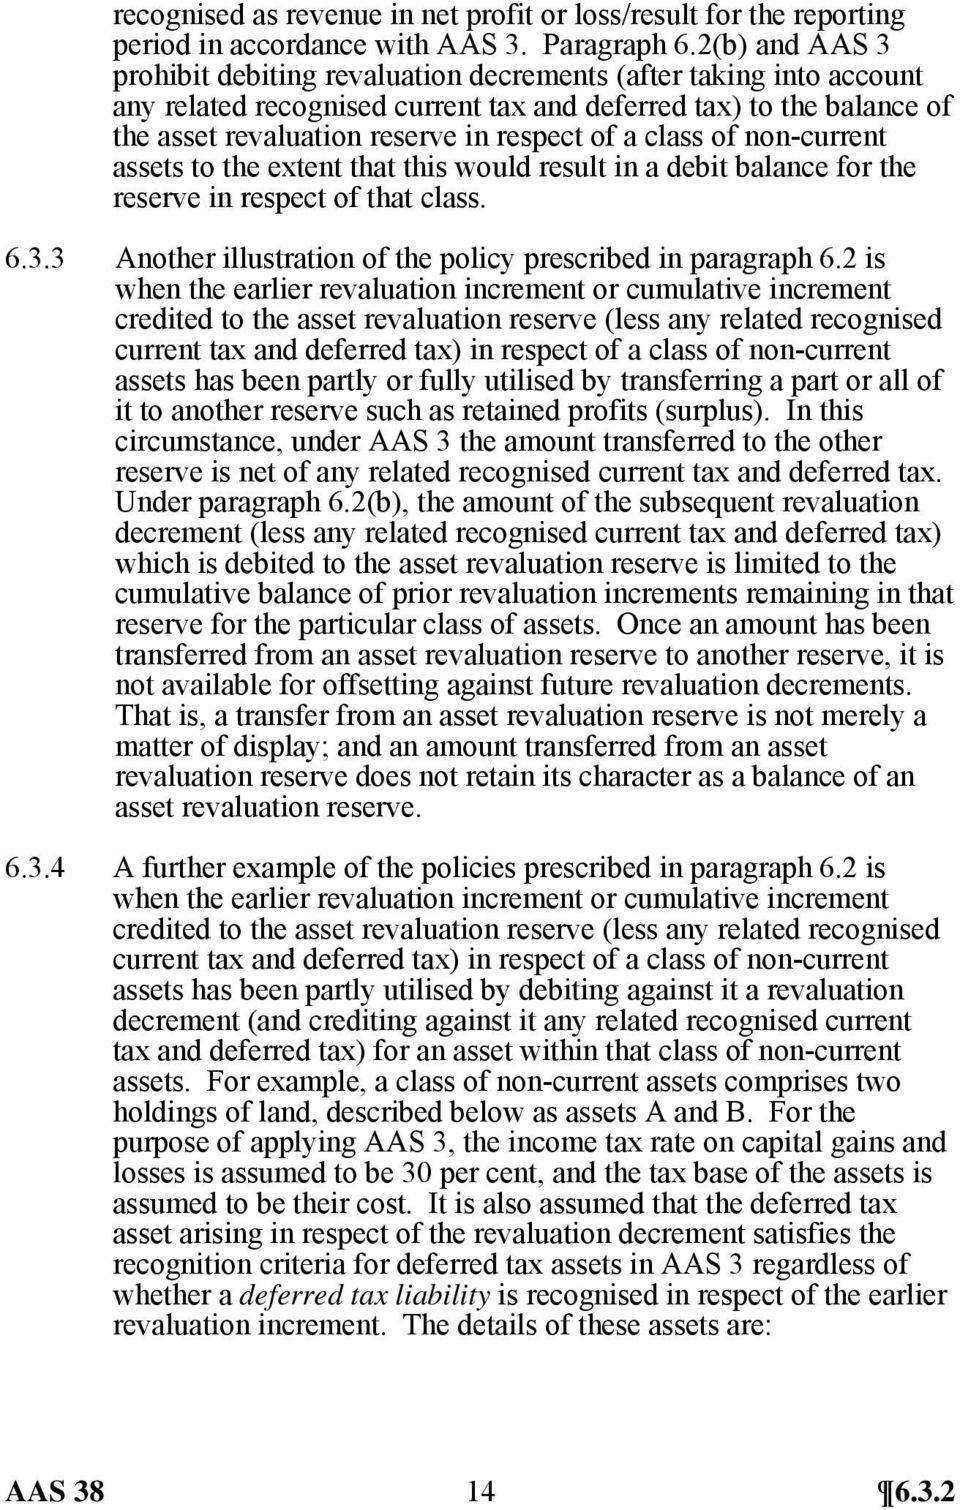 class of non-current assets to the extent that this would result in a debit balance for the reserve in respect of that class. 6.3.3 Another illustration of the policy prescribed in paragraph 6.